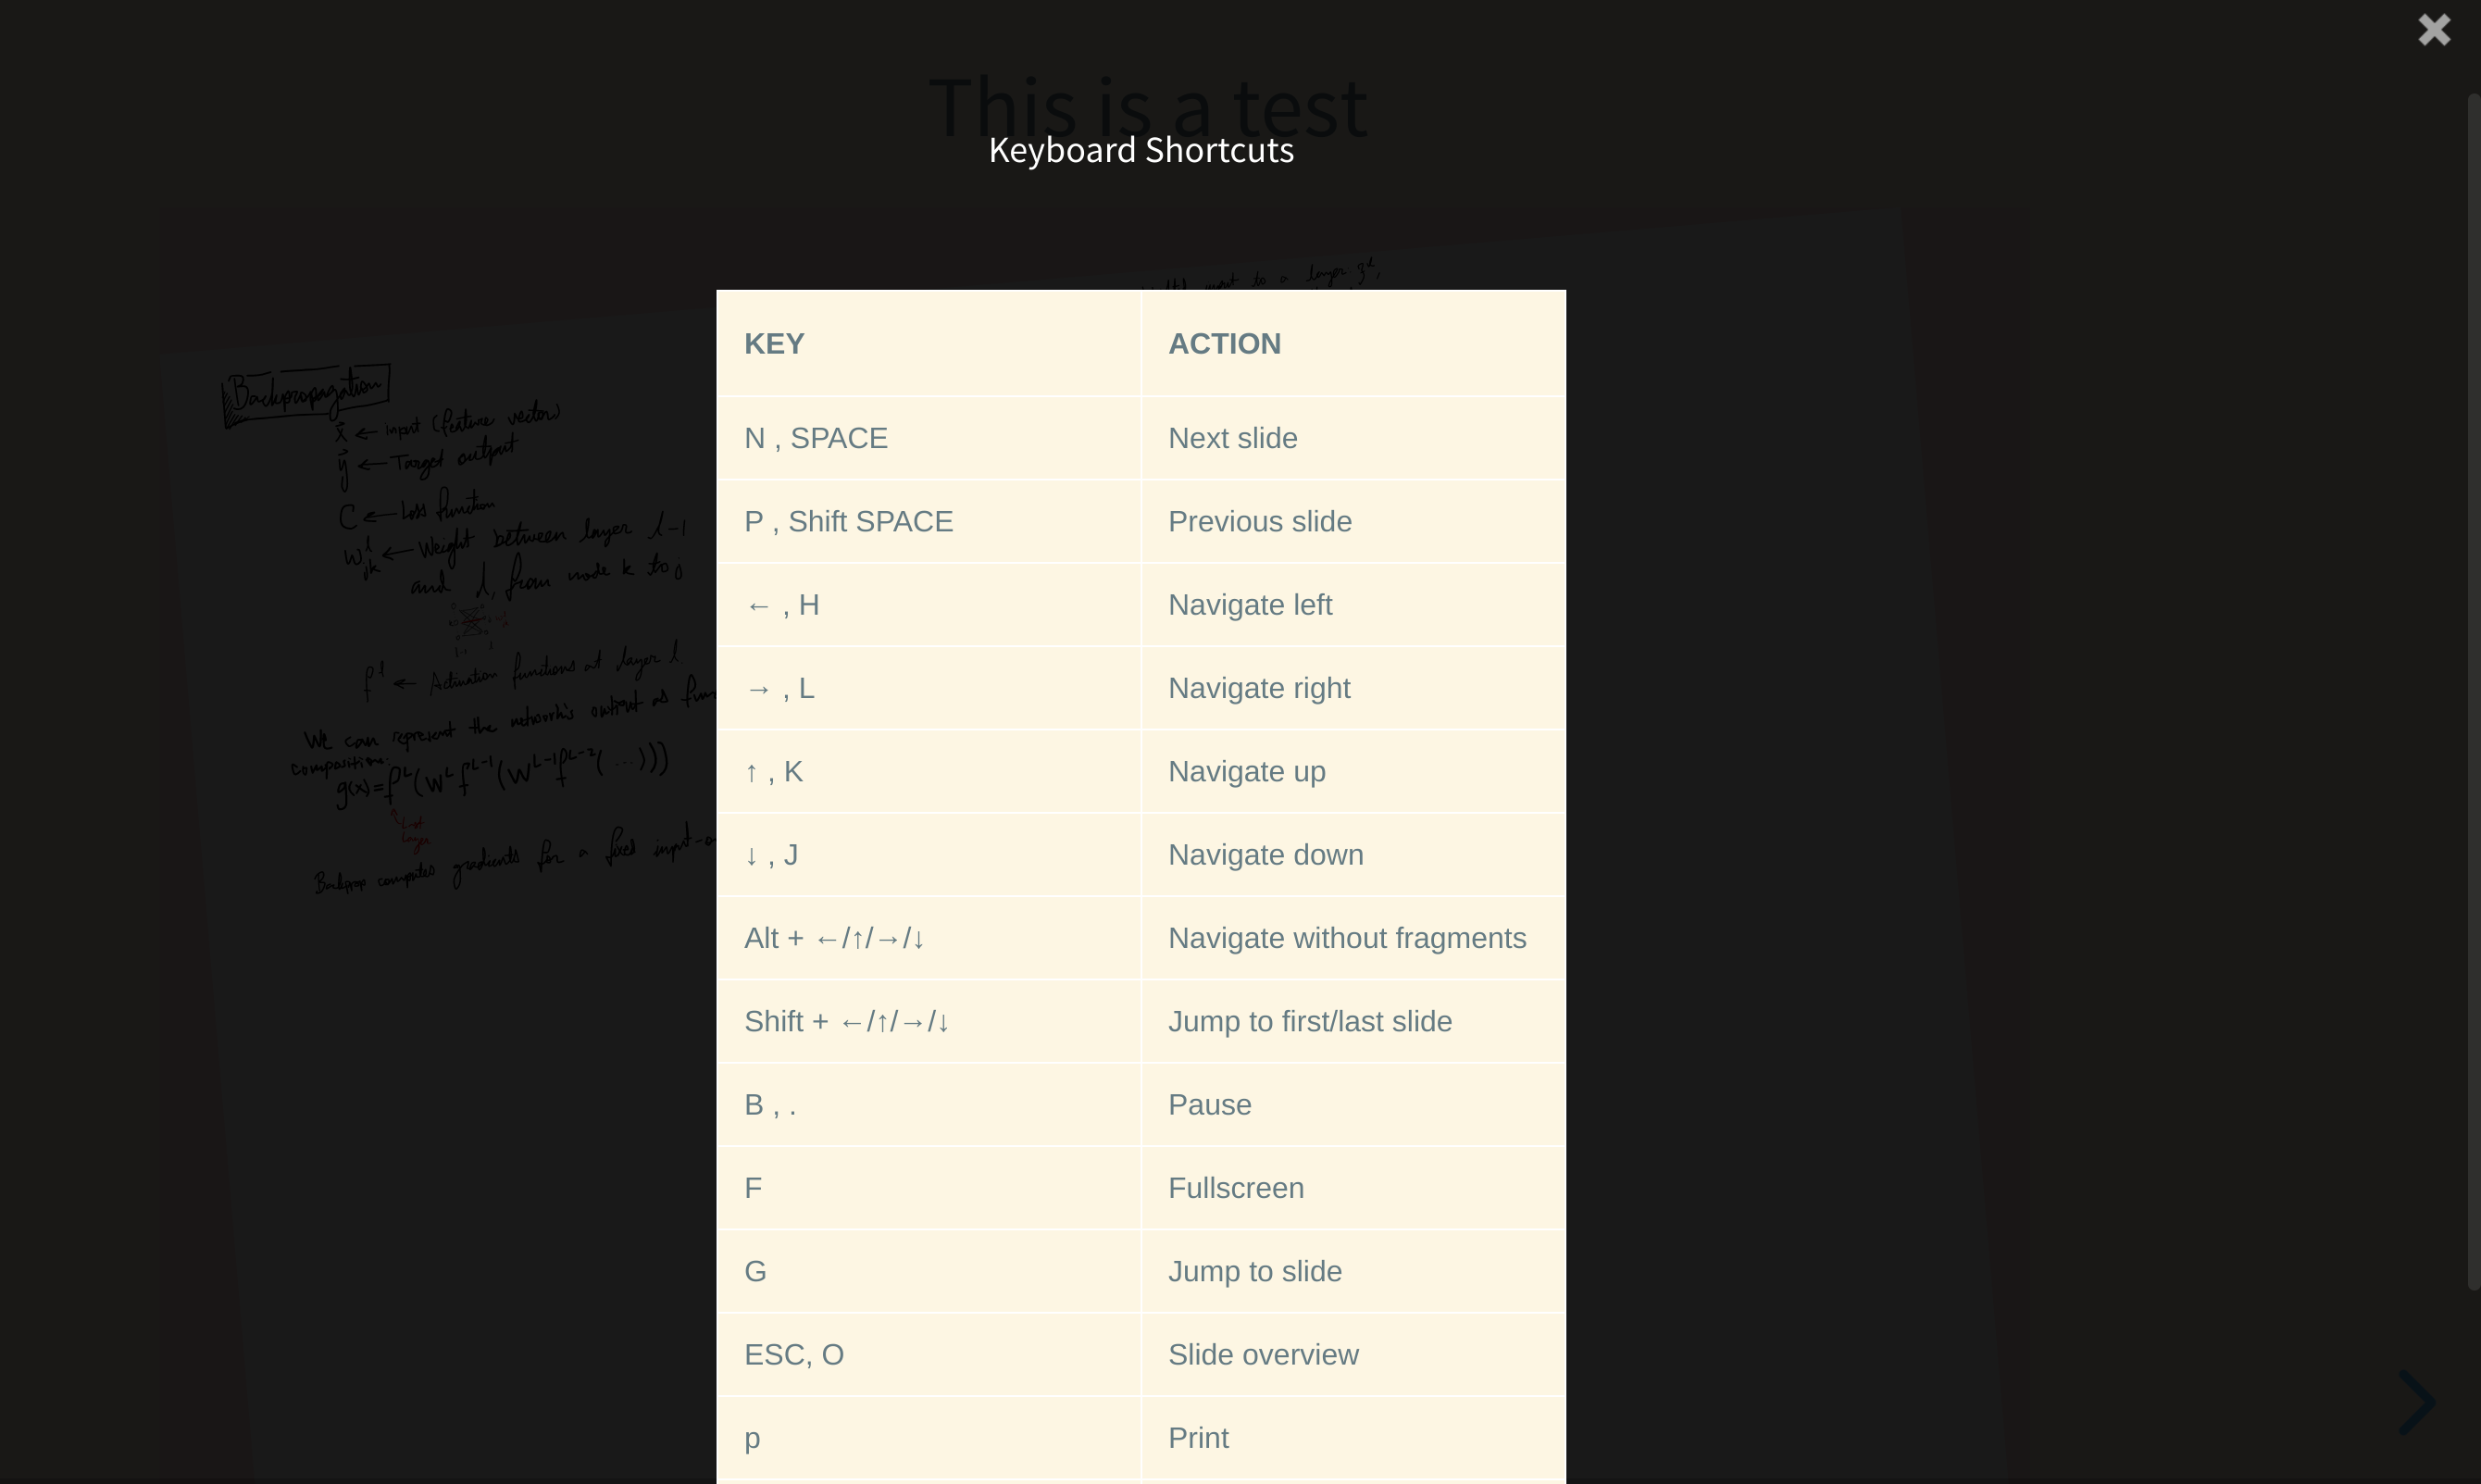 screenshot: A list of shortcuts, including space: to next slide, shift+space: to previous slide, p: print.